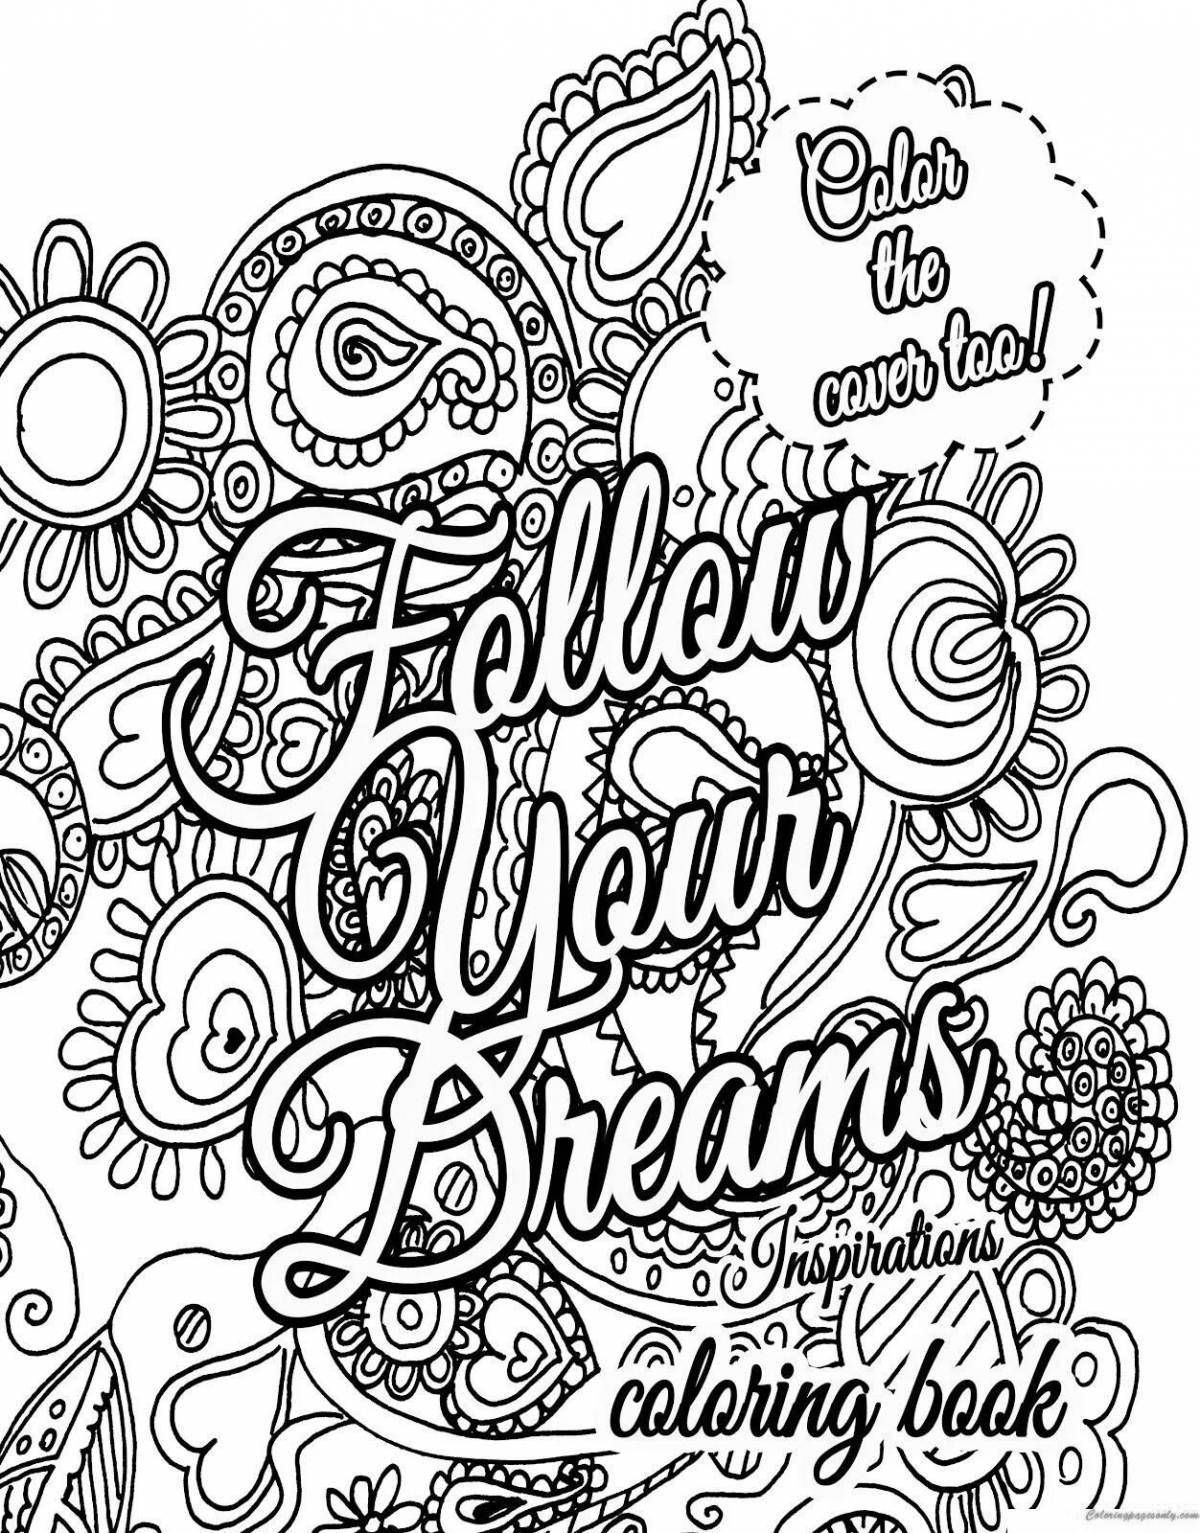 Bright quotes coloring book